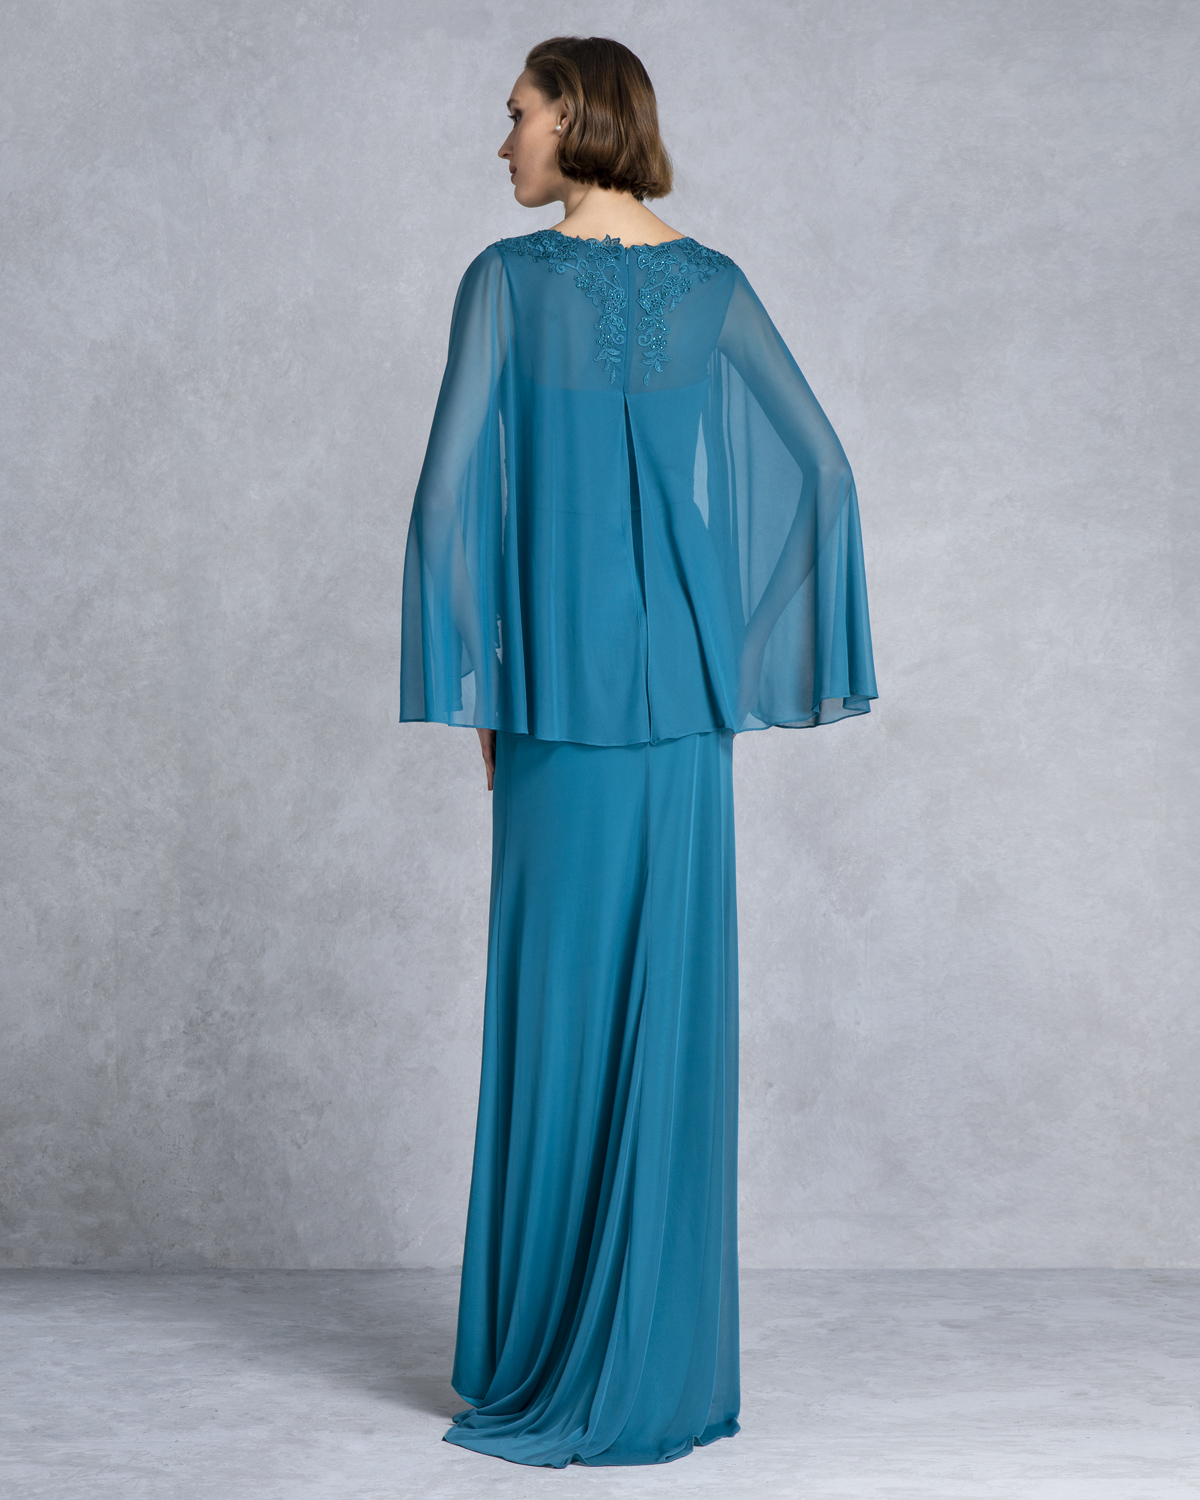 Classic Dresses / Long evening dress with lace top and chifon sleeves